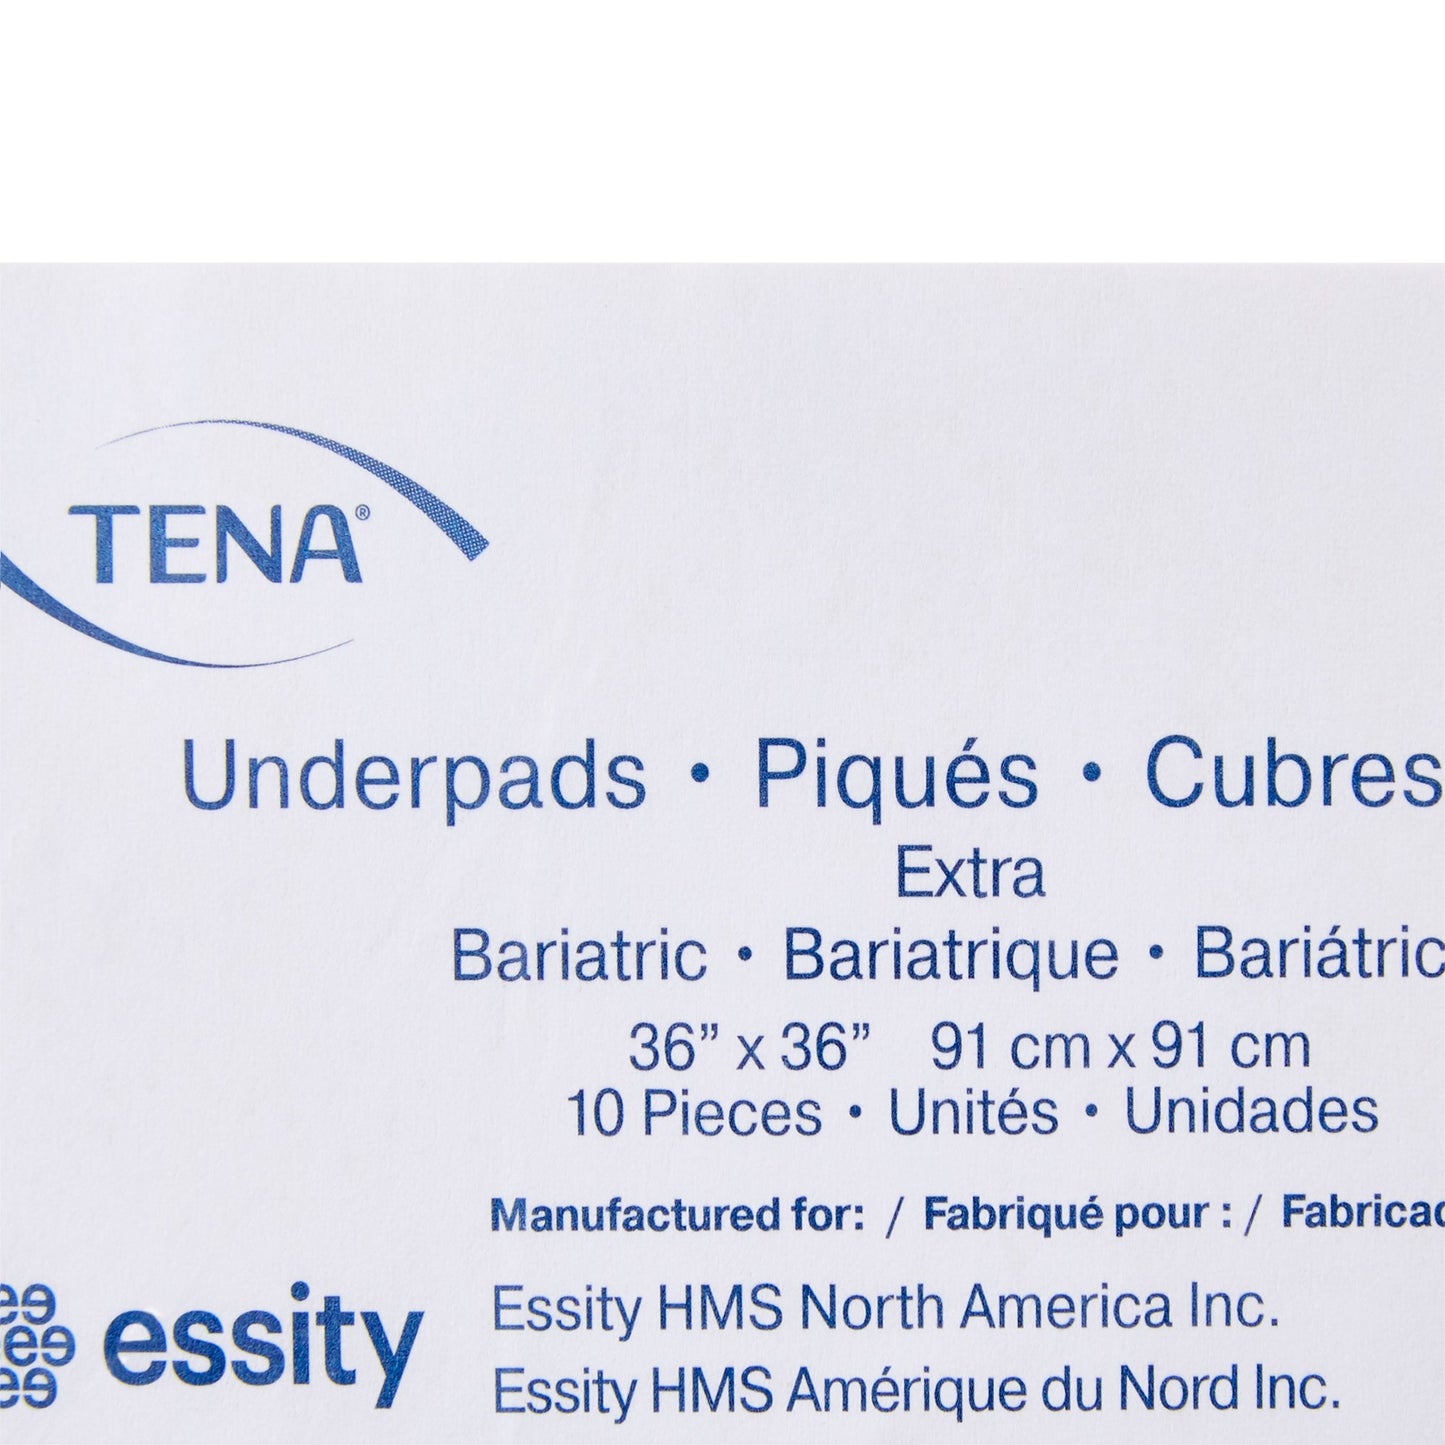 TENA Underpad Extra, 36" x 36", Disposable, Light Absorbency